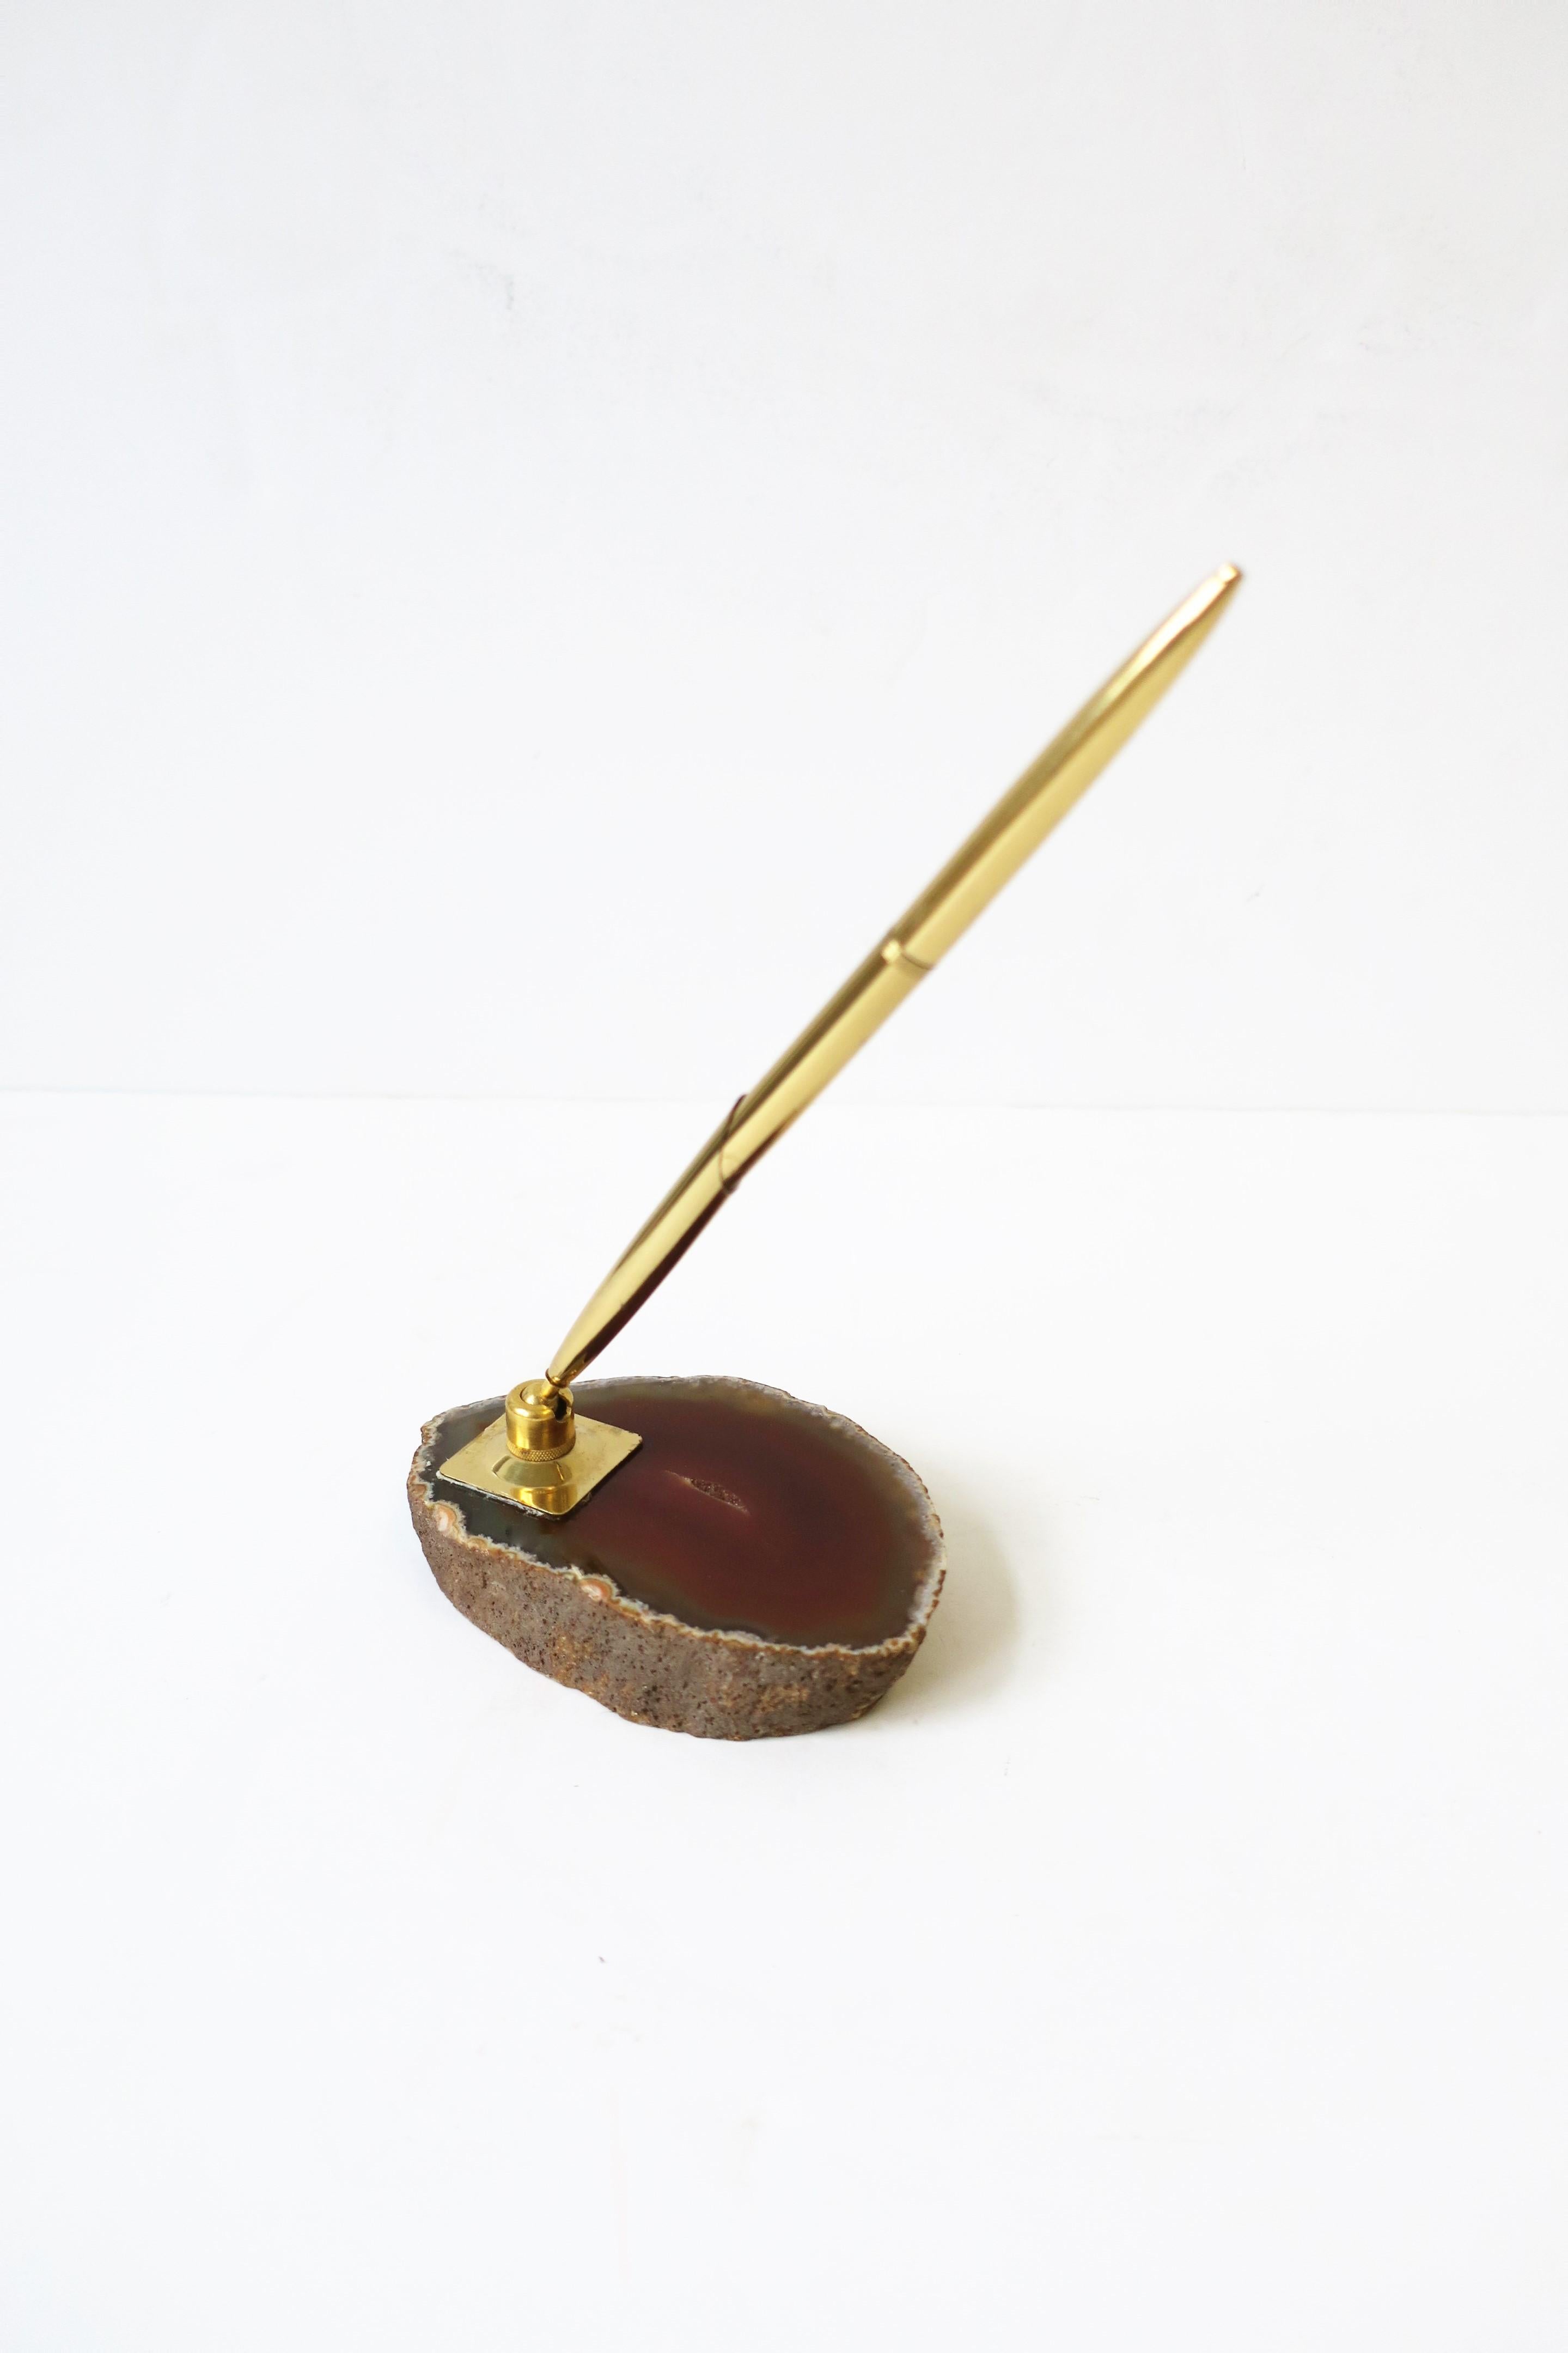 Agate Onyx and Brass Desk Pen Holder, circa 1970s For Sale 4